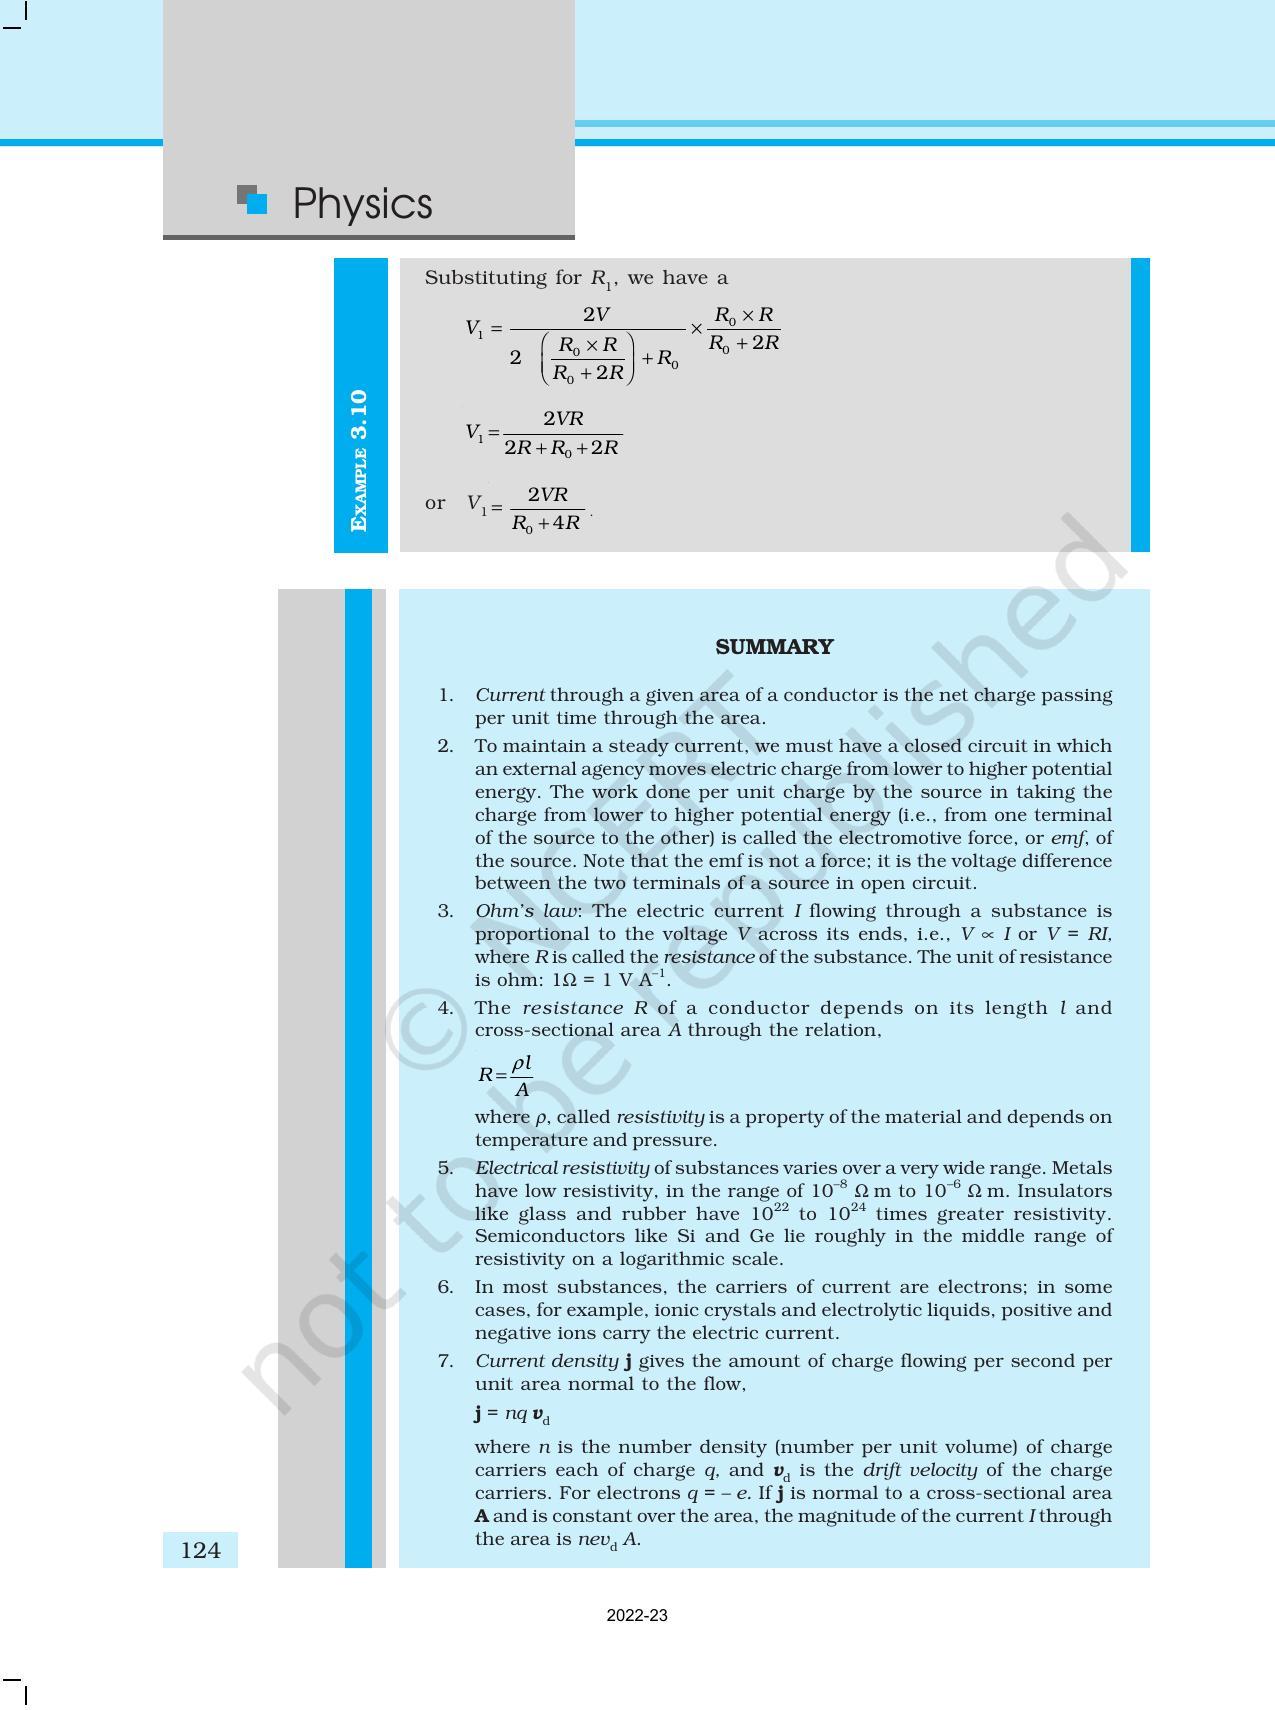 NCERT Book for Class 12 Physics Chapter 3 Current Electricity - Page 32